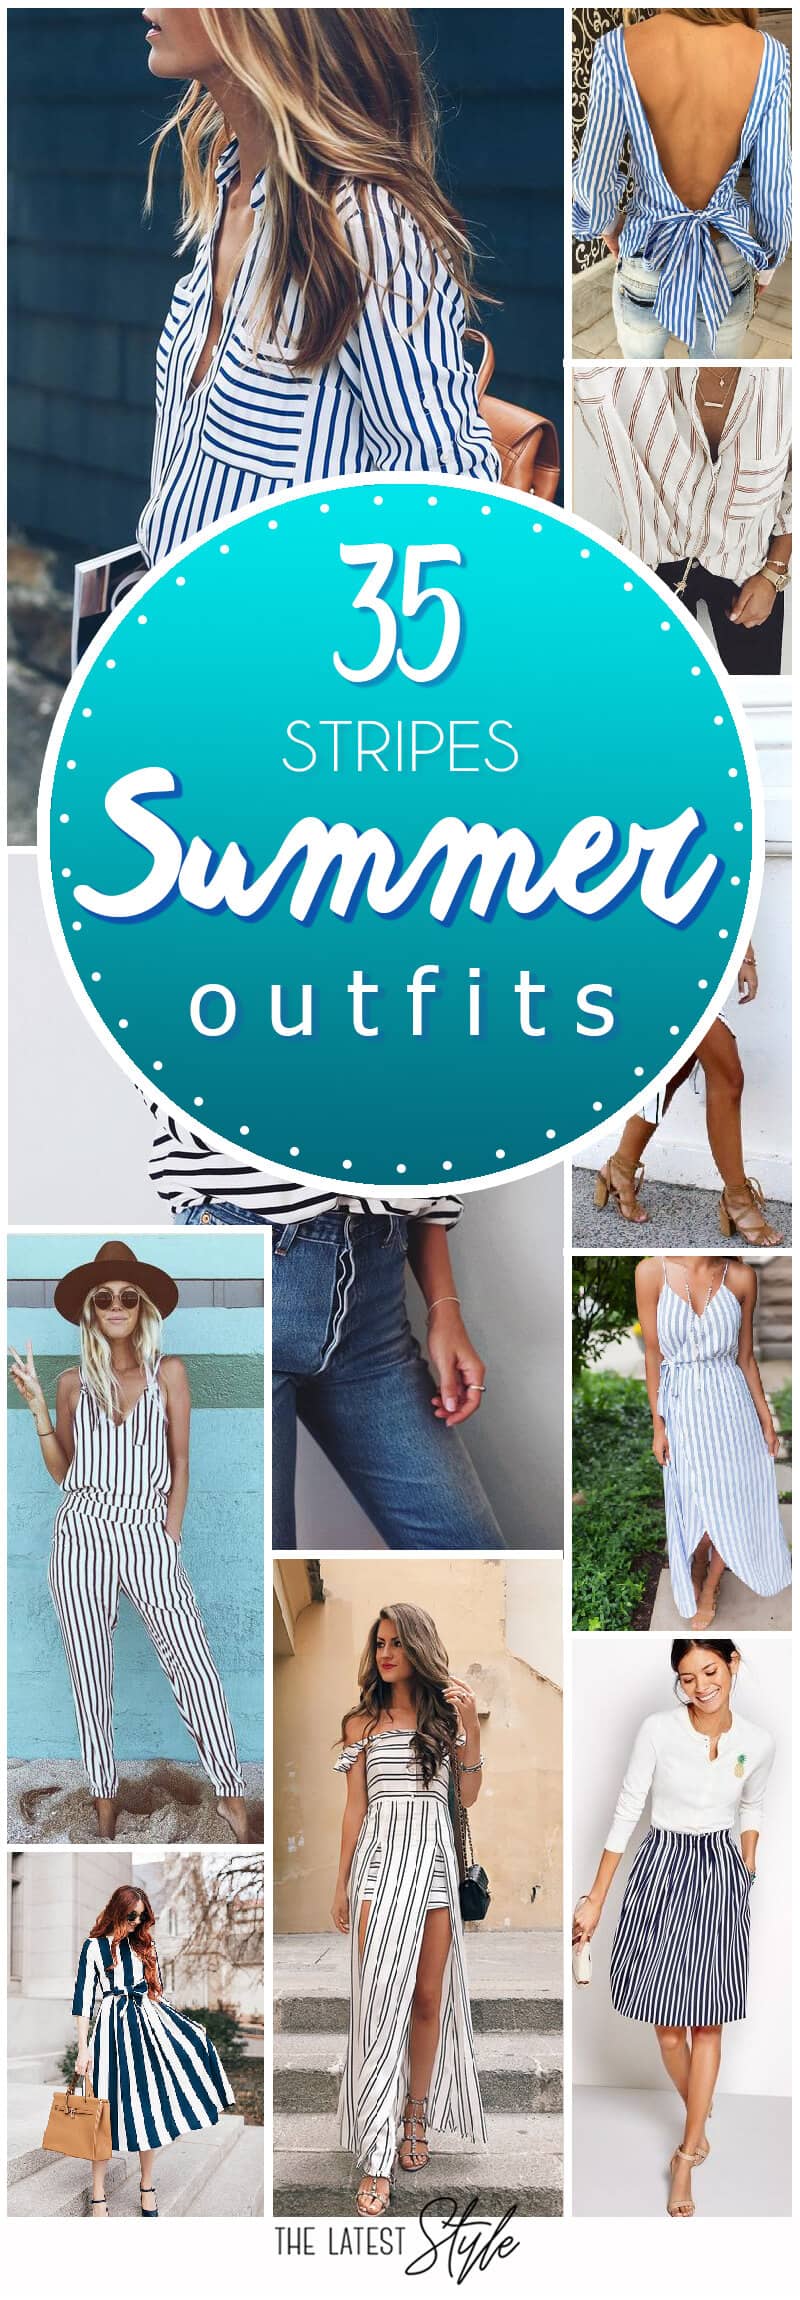 35 Pretty Summer Outfits With Stripes